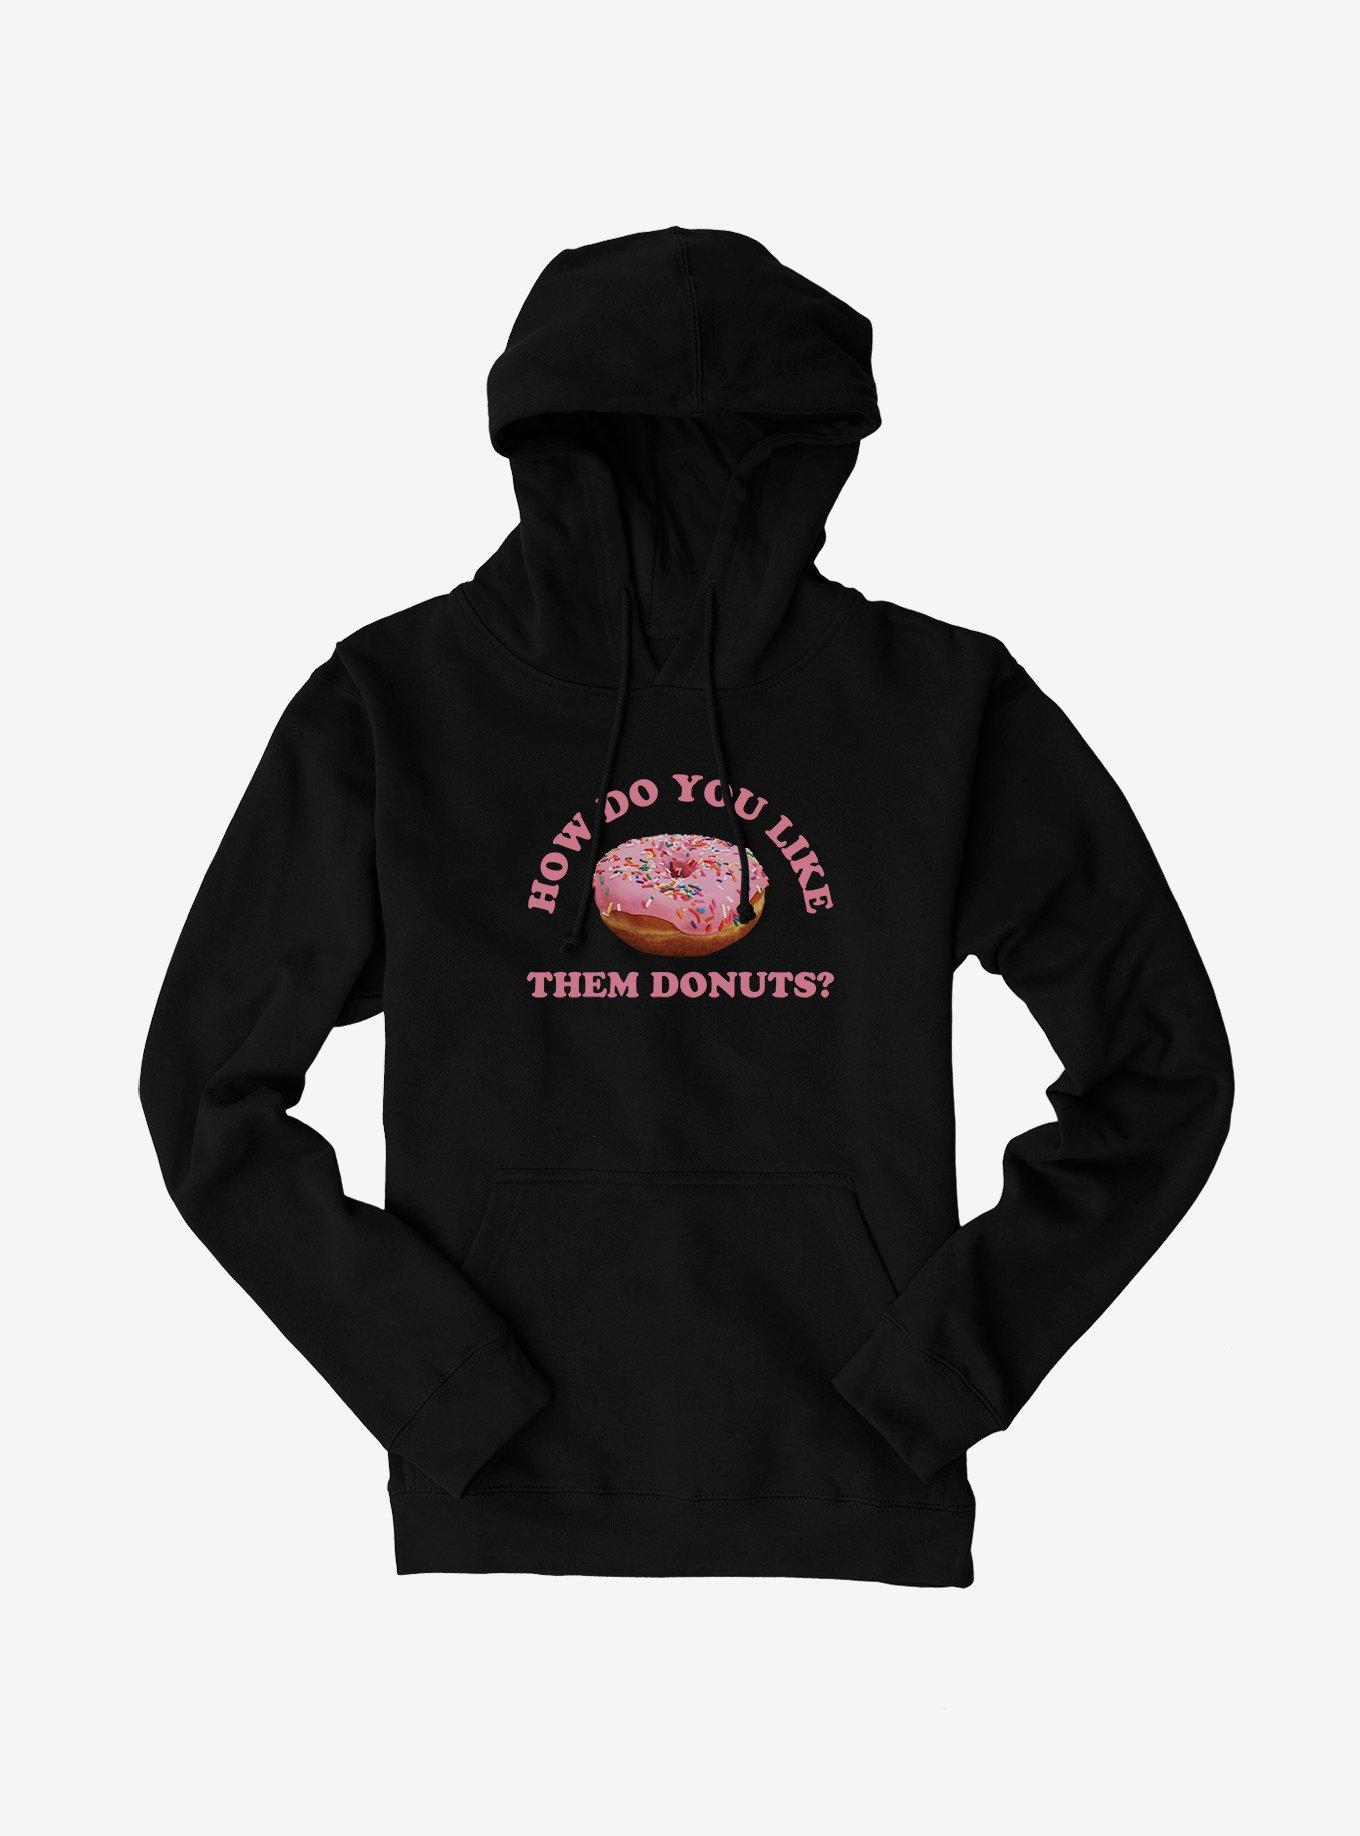 Hot Topic How Do You Like Them Donuts Hoodie, BLACK, hi-res